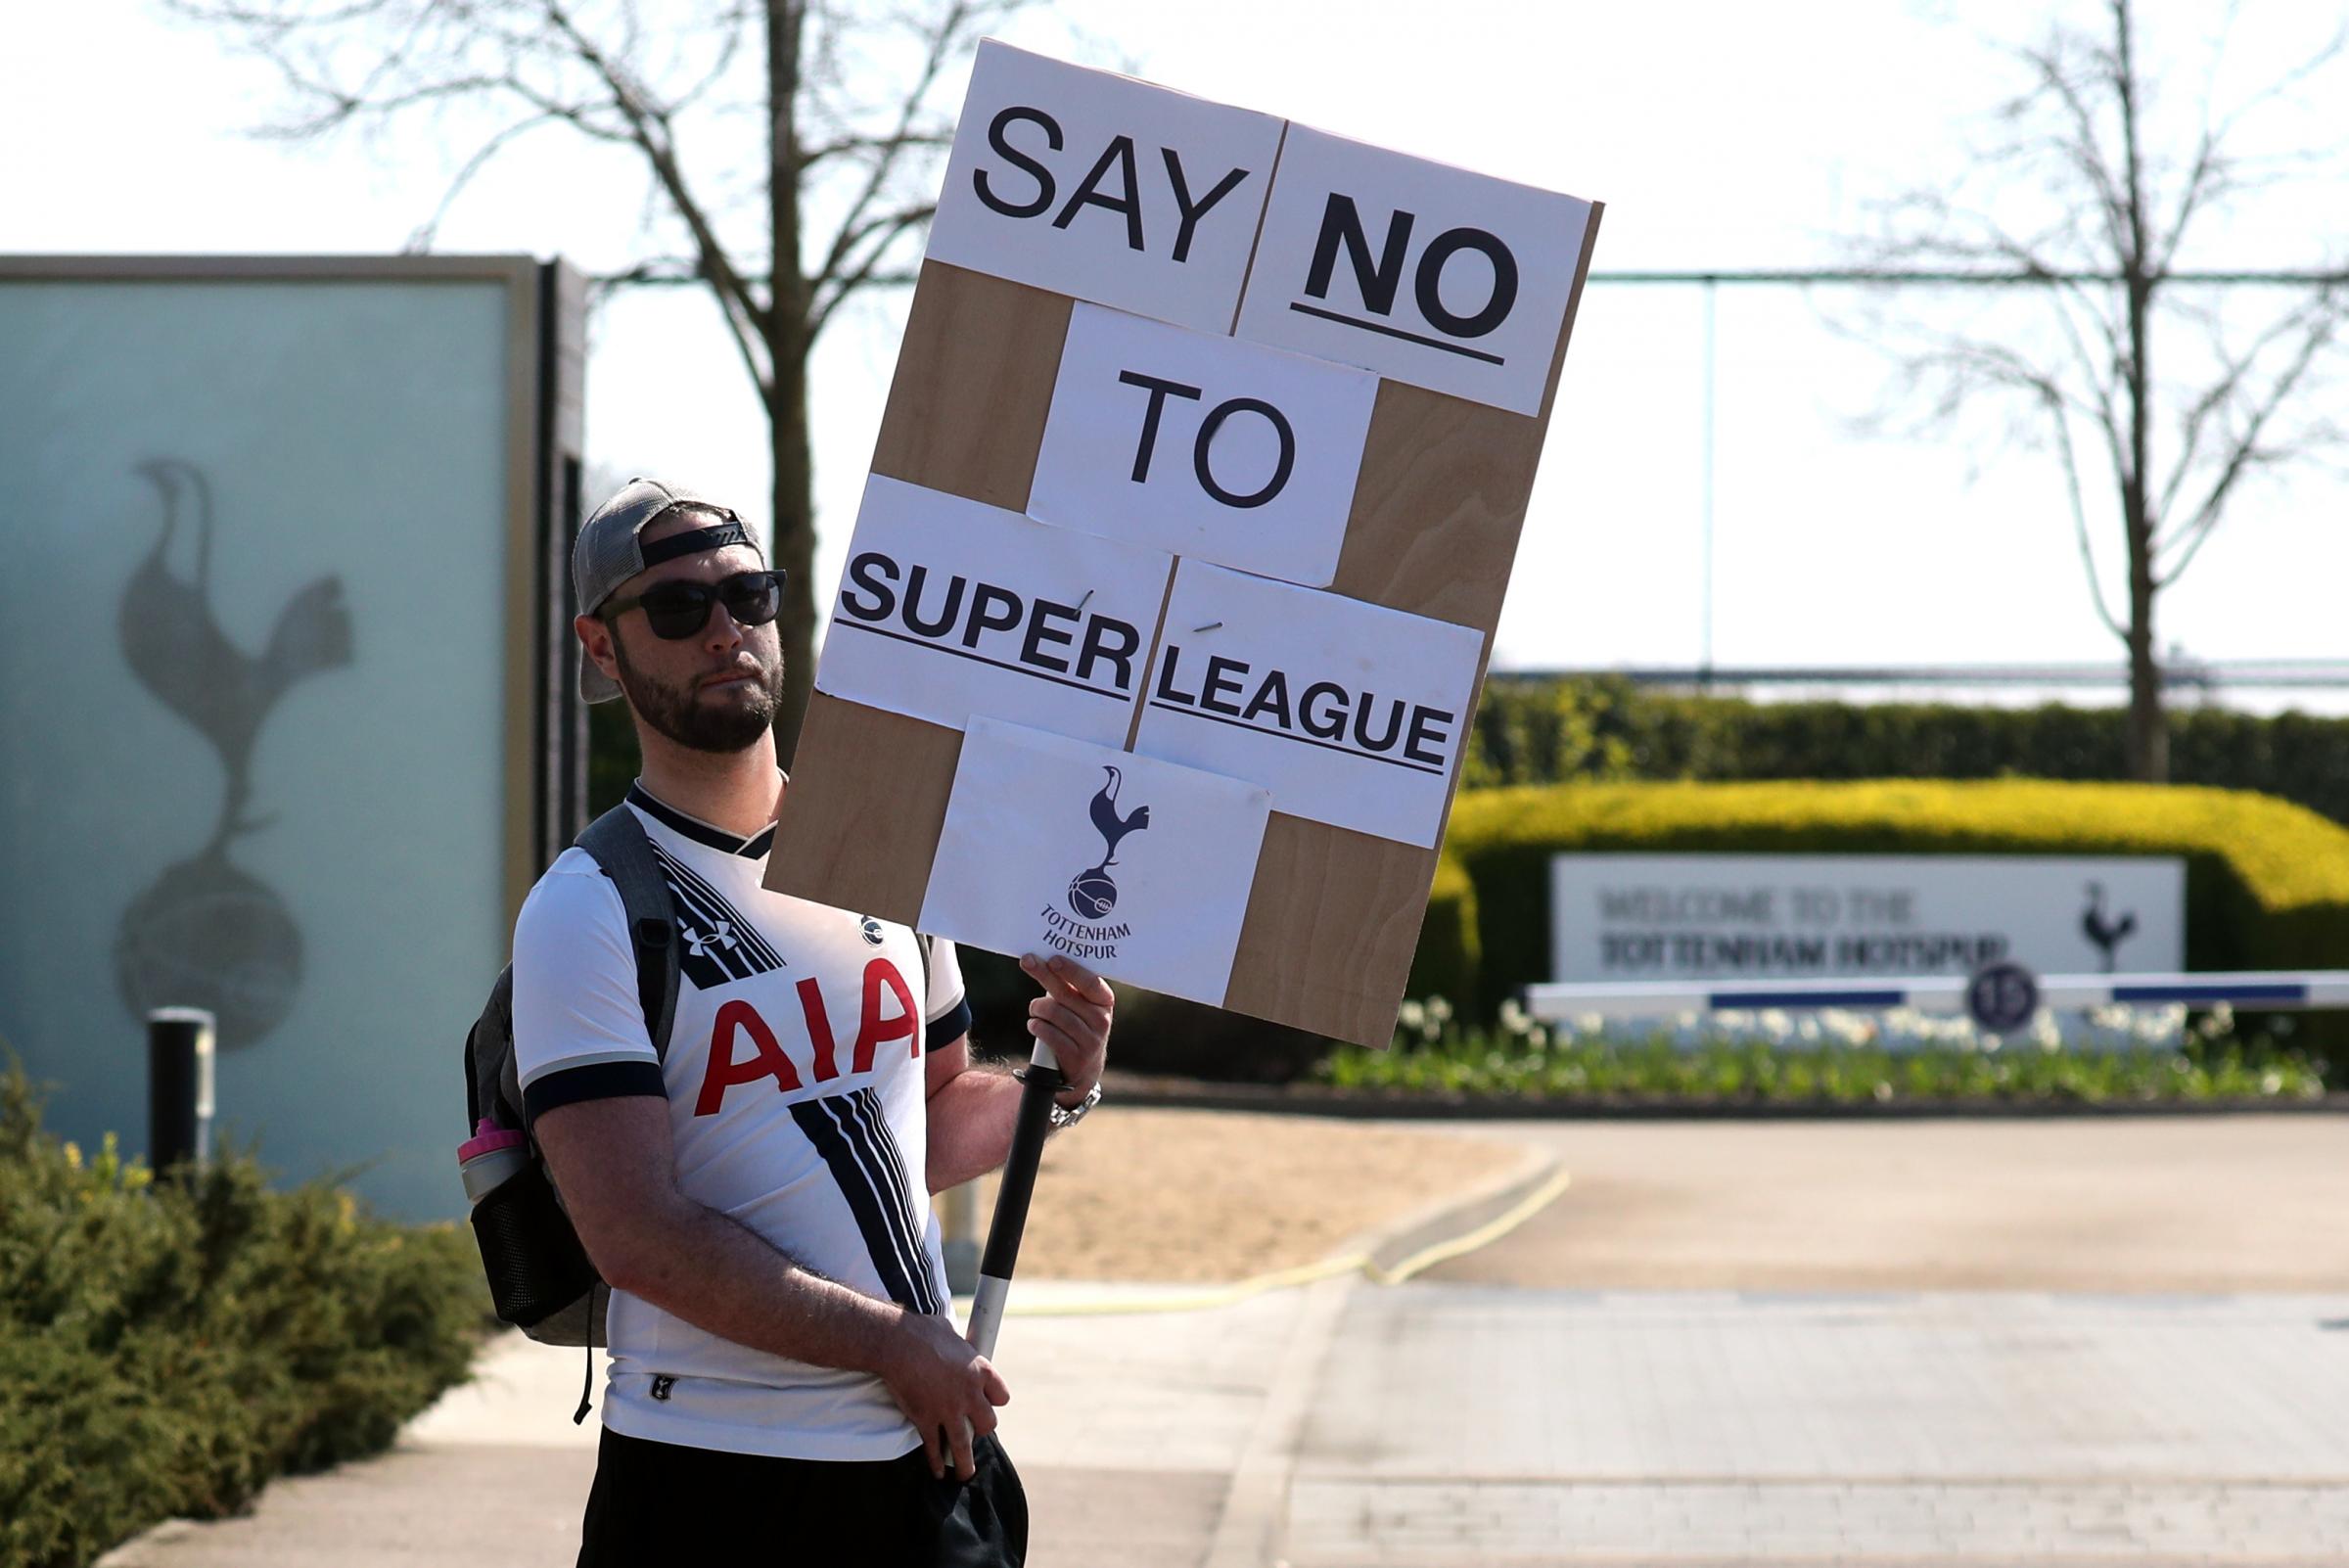 A Tottenham fan also protested the Super League proposal outside the clubs training ground. Credit: PA